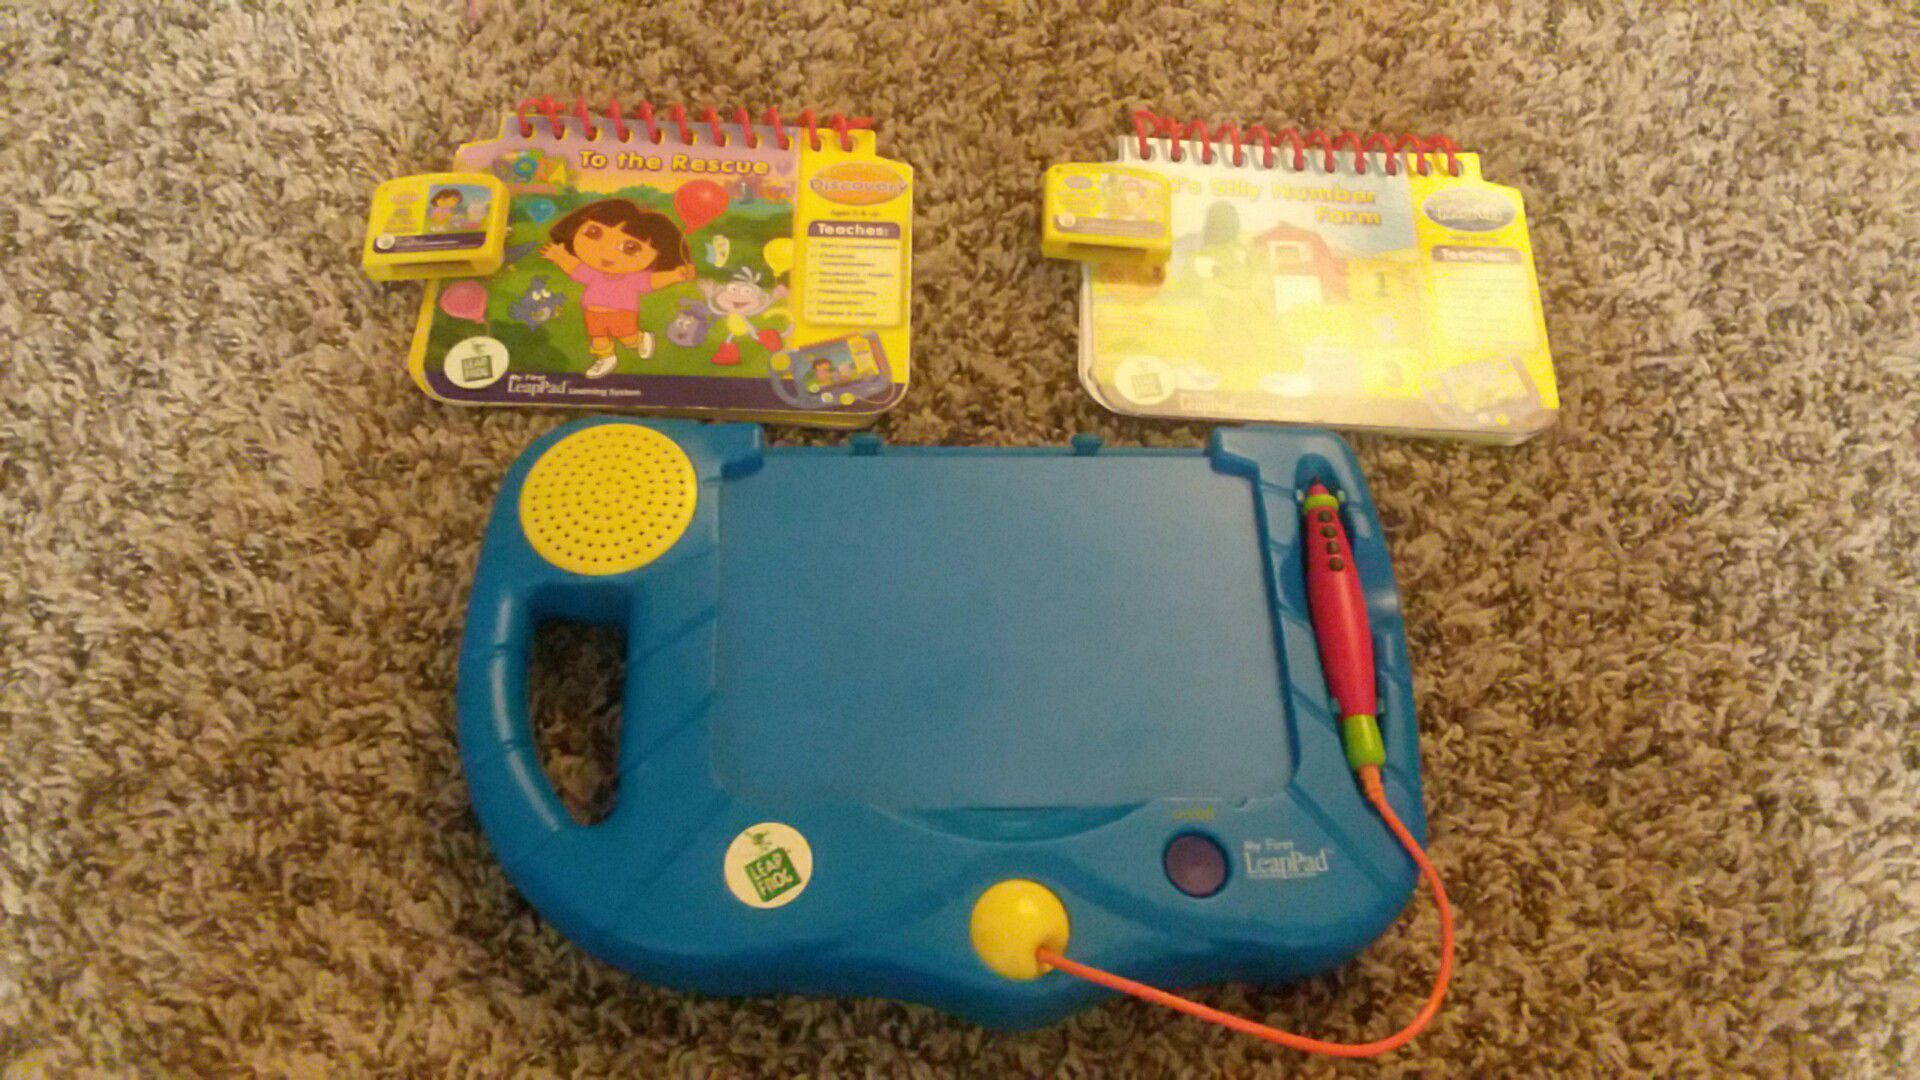 Leap Frog learning system and Quantum pad for Sale in Melbourne, FL -  OfferUp